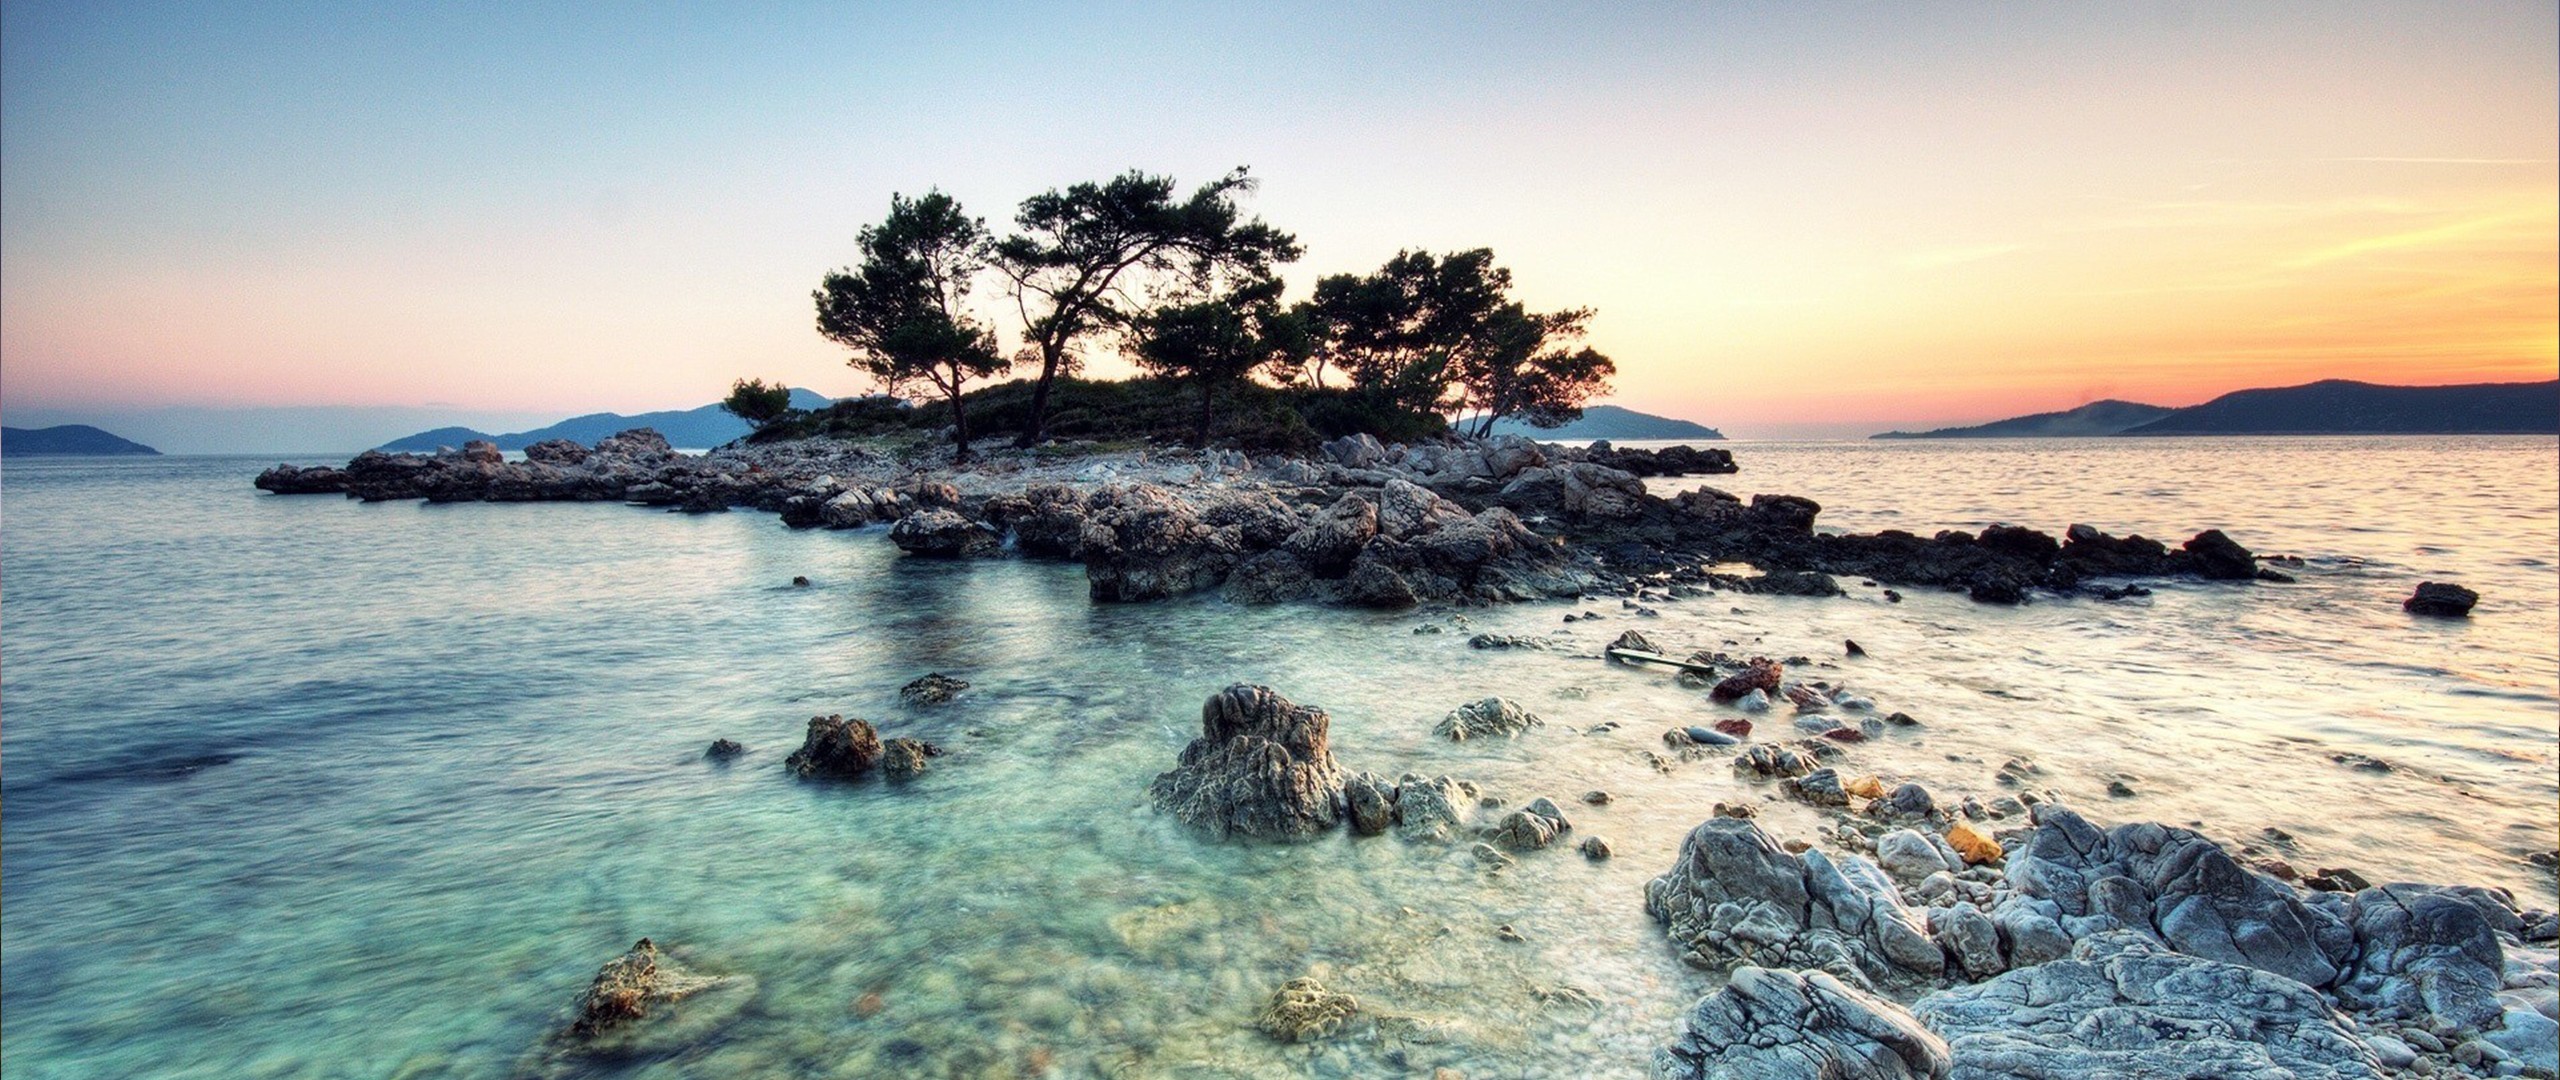 General 2560x1080 ultrawide photography nature water Croatia outdoors